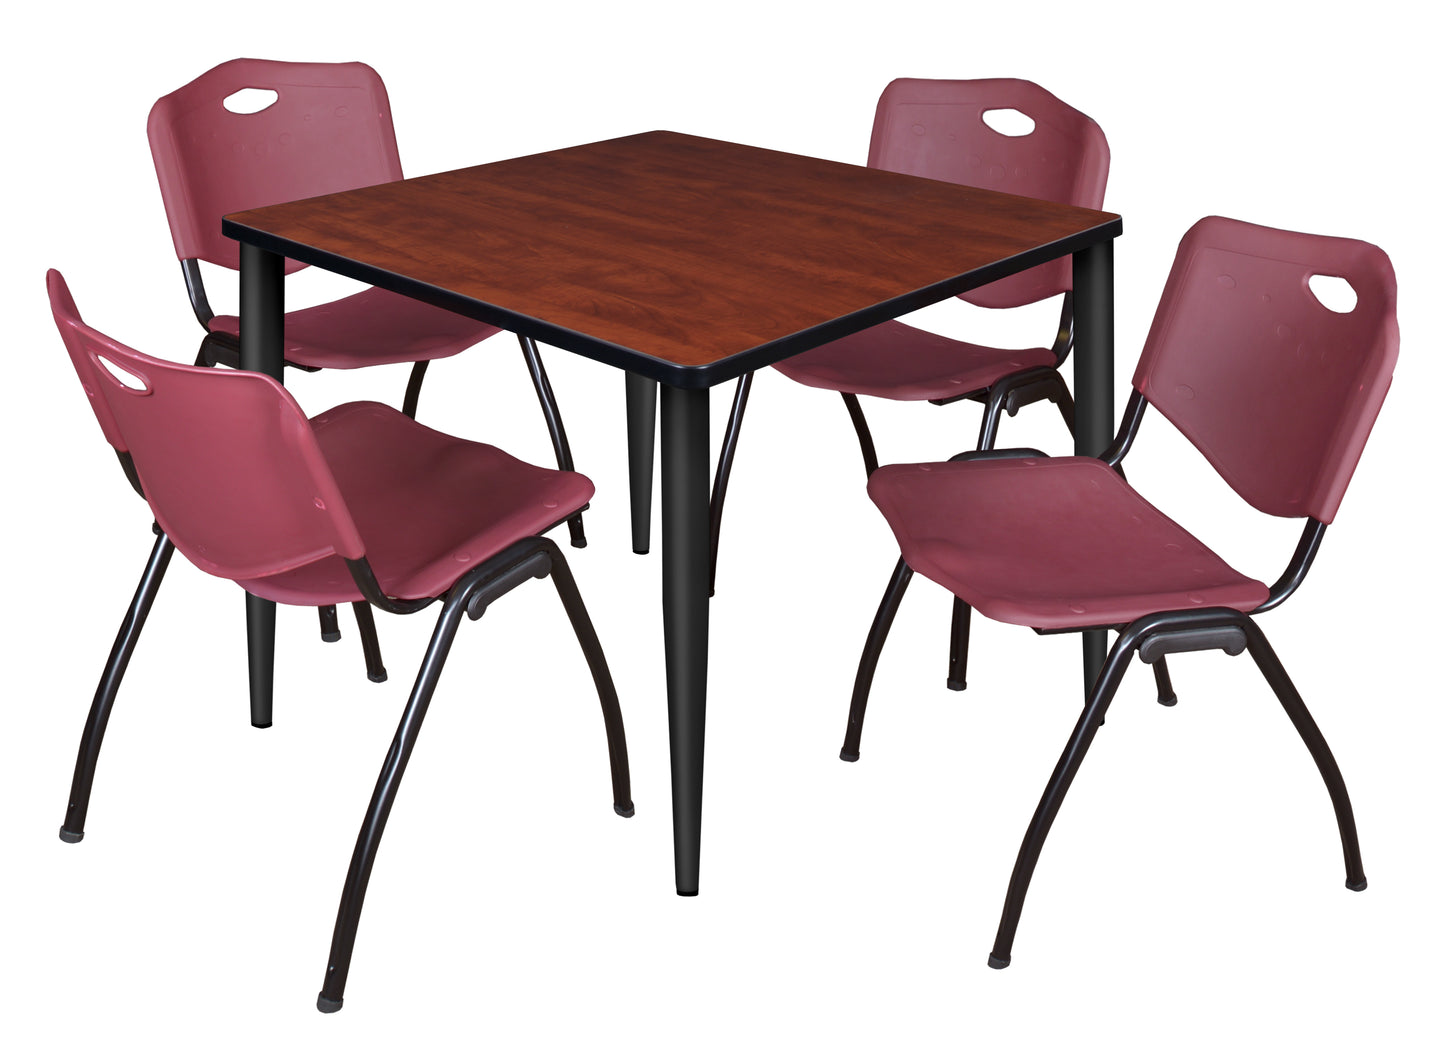 Regency Kahlo 36 in. Square Breakroom Table & 4 M Stack Chairs